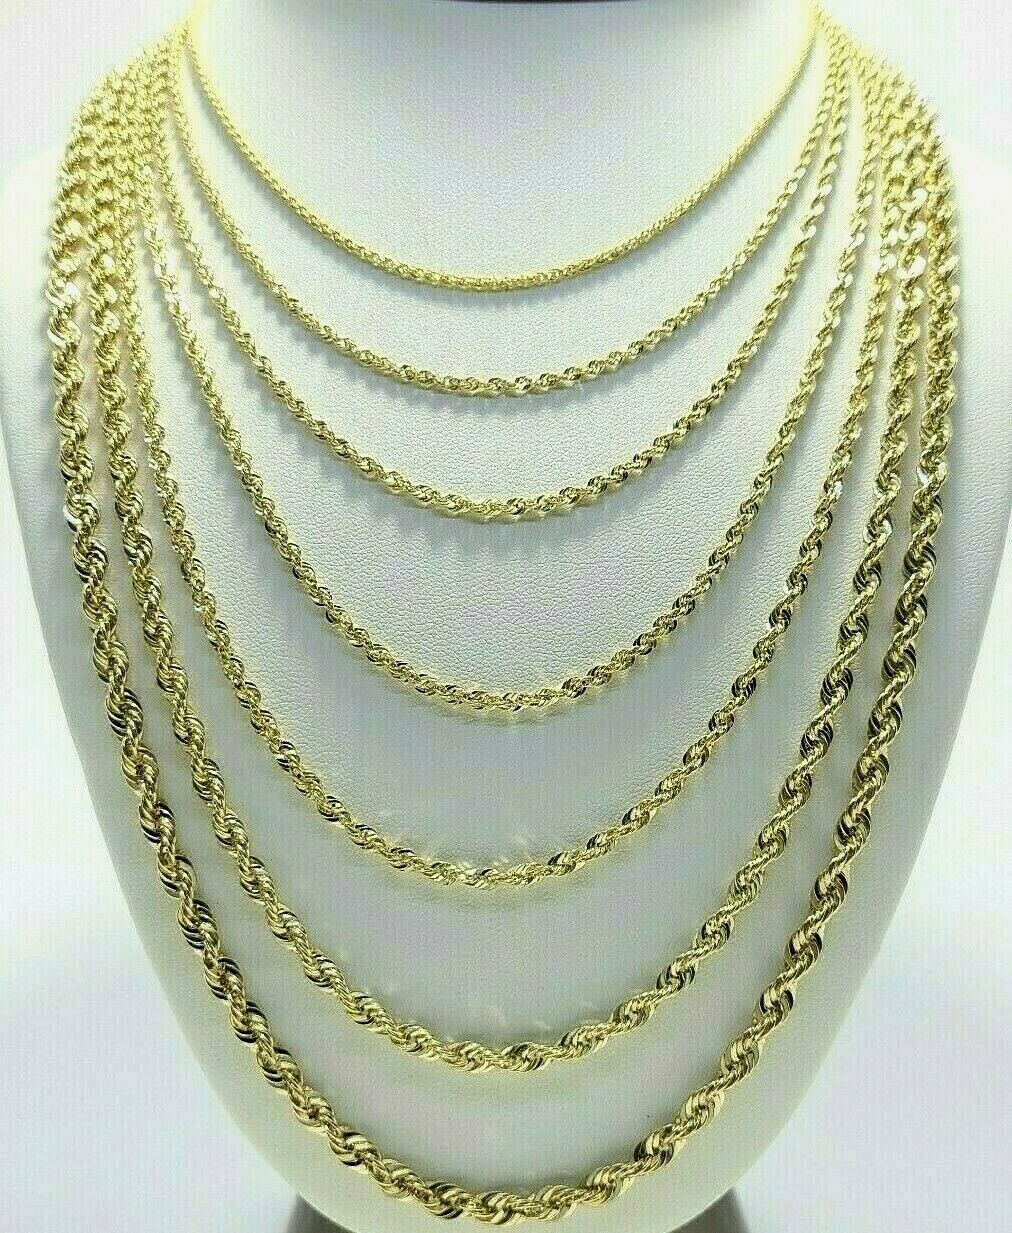 Real 10k Yellow Gold 2mm - 6mm Diamond Cut Rope Chain Necklace Bracelet 16"- 30"